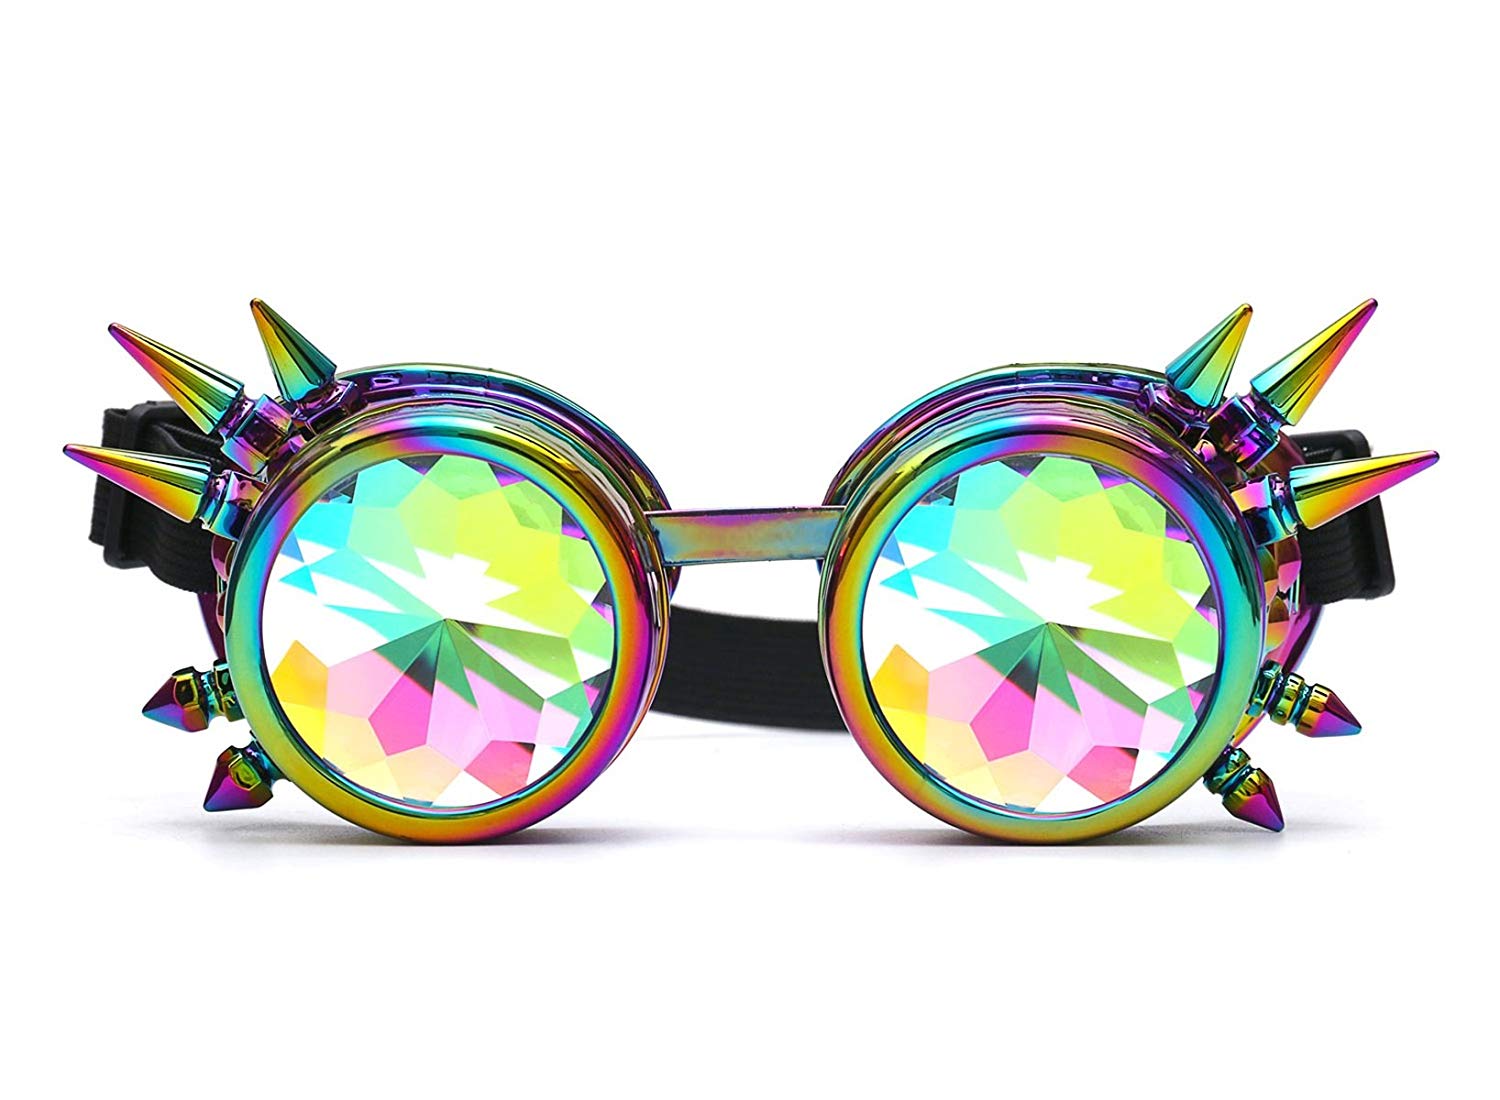 Glasses KING Vintage Steampunk Kaleidoscope Goggles Glasses with Rainbow Crystal Glass Lens Stripe Silver Frame